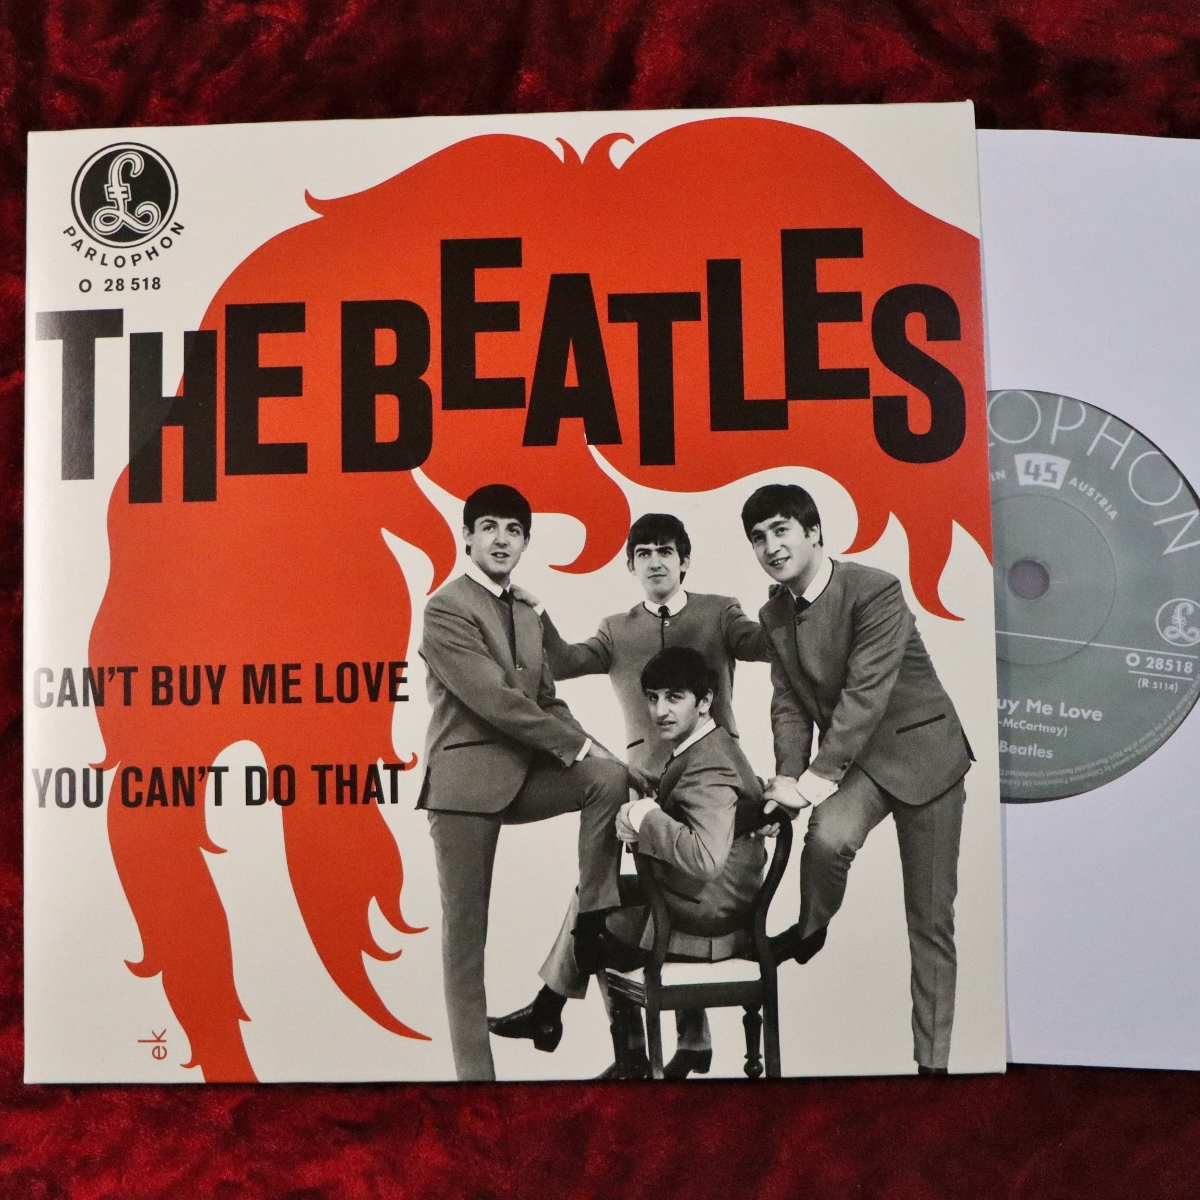 The Beatles/ビートルズ CAN'T BUY ME LOVE / YOU CAN'T DO THAT 2019シングルボックス バラ EU盤 (オーストリア盤スリーブ) 21C26005